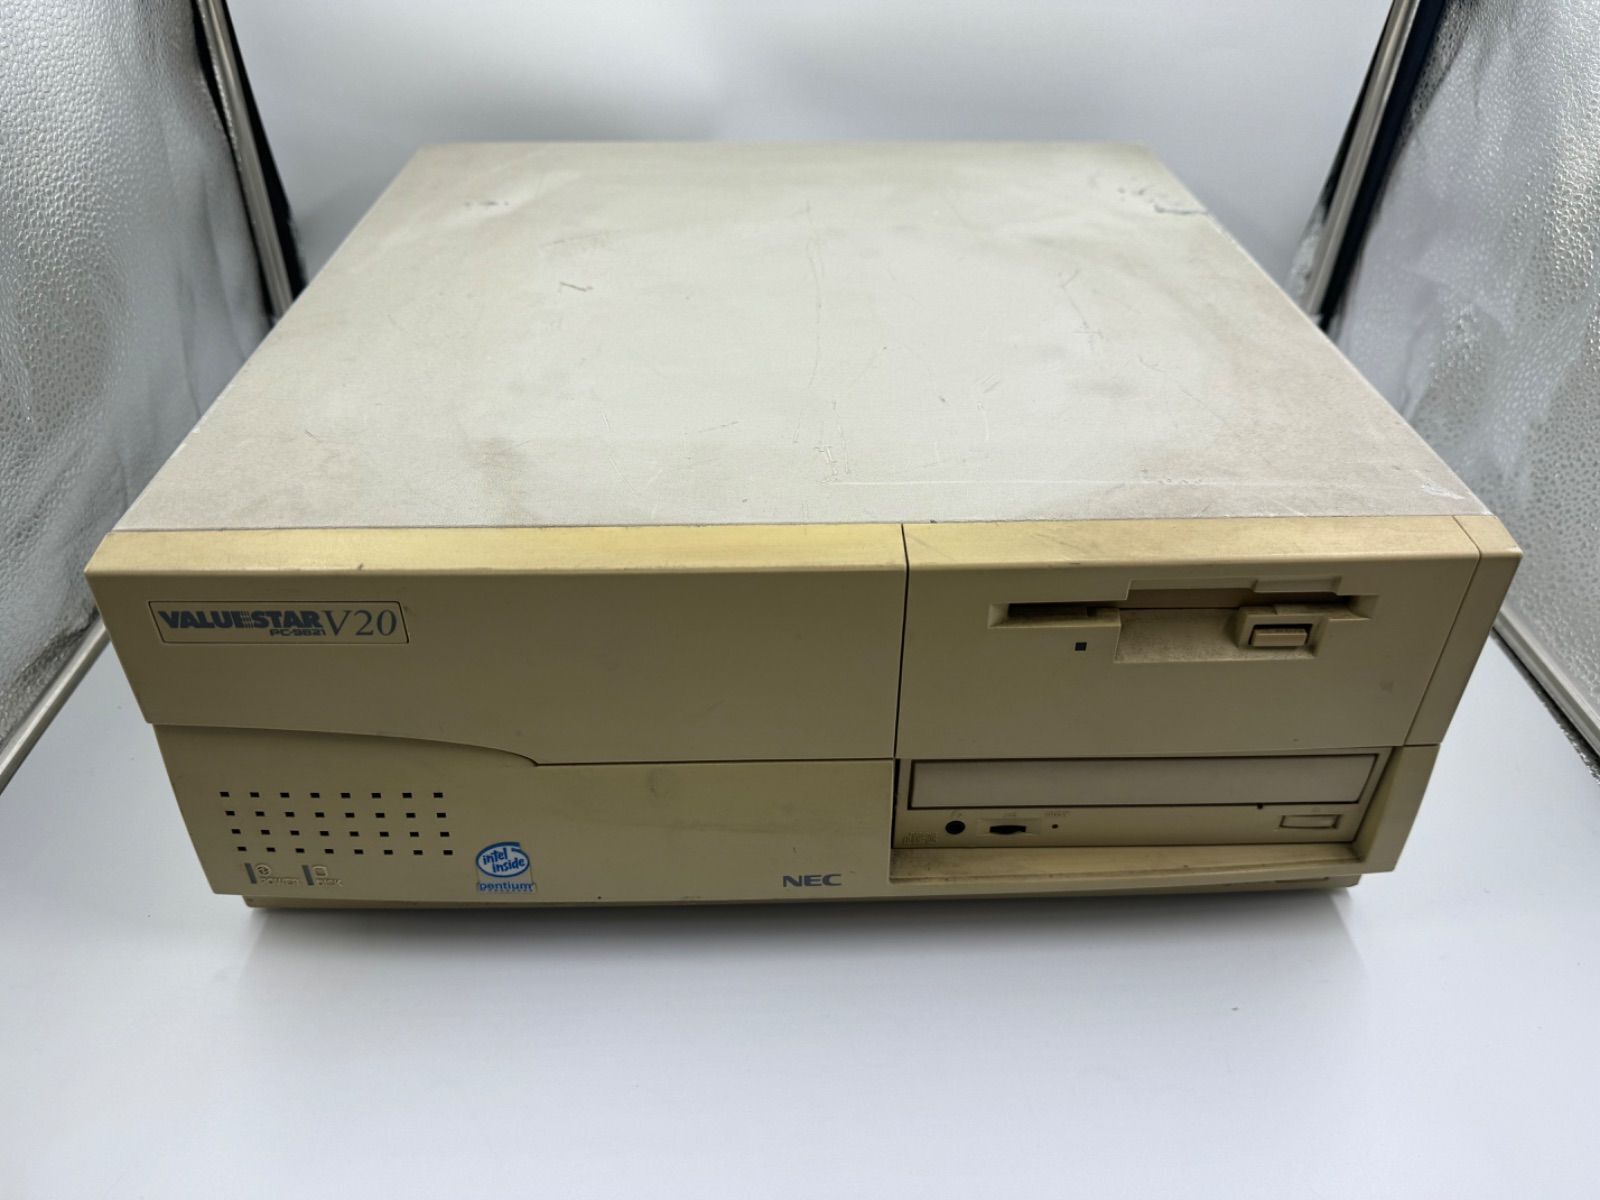 Retro PC PC-9821V20 Main unit only Power confirmed Junk From Japan